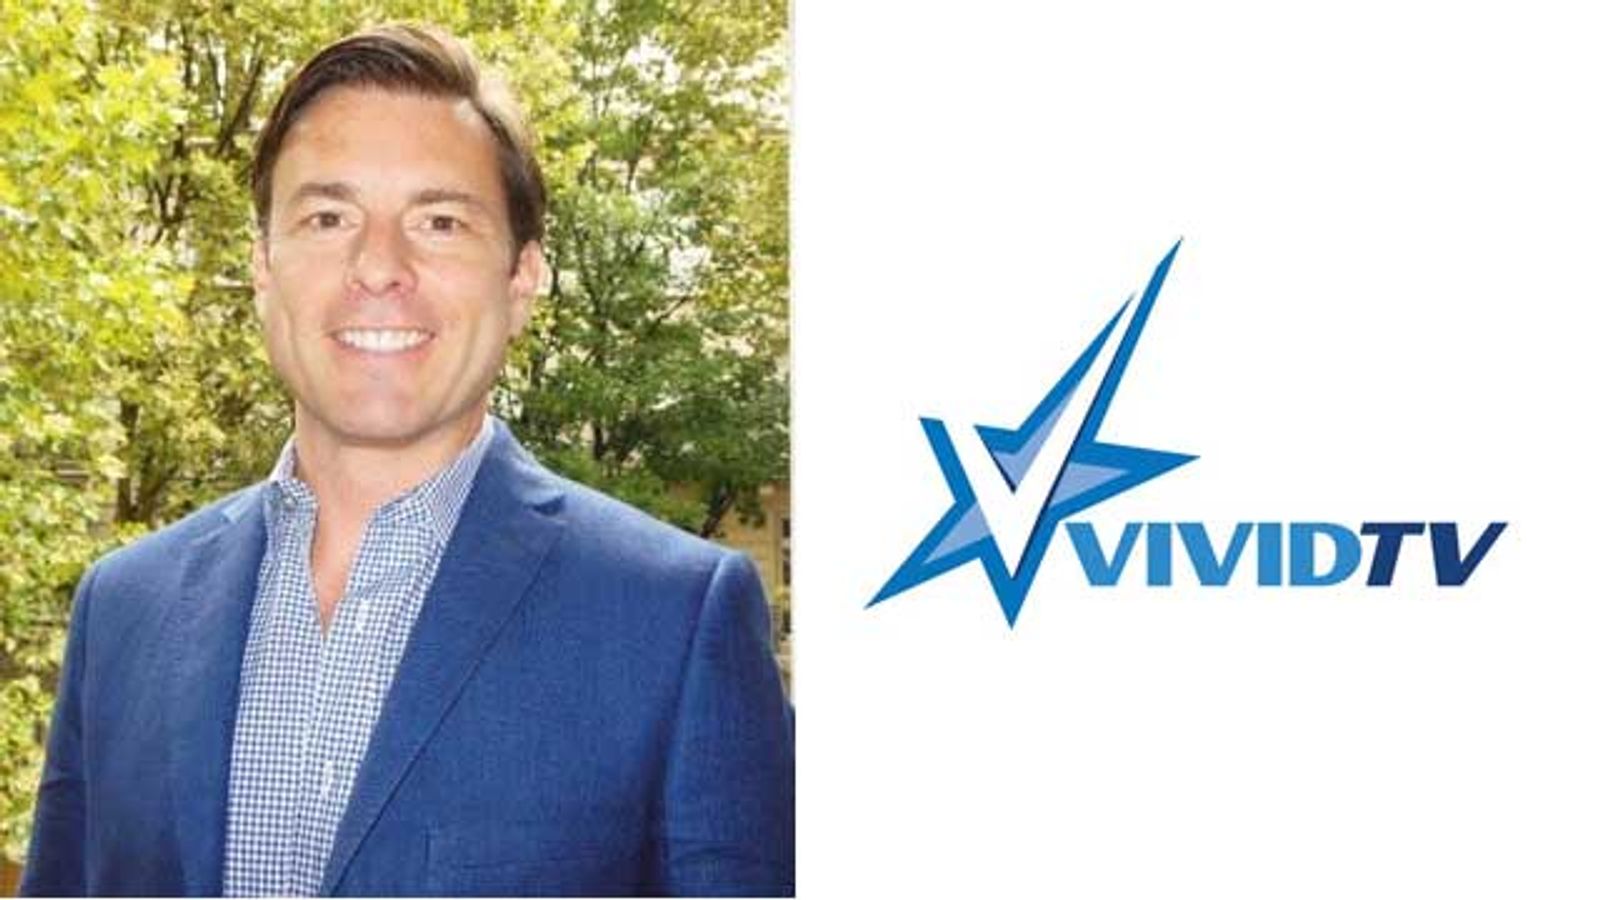 VividTV Names Walter as Business Chief in Canada And Europe